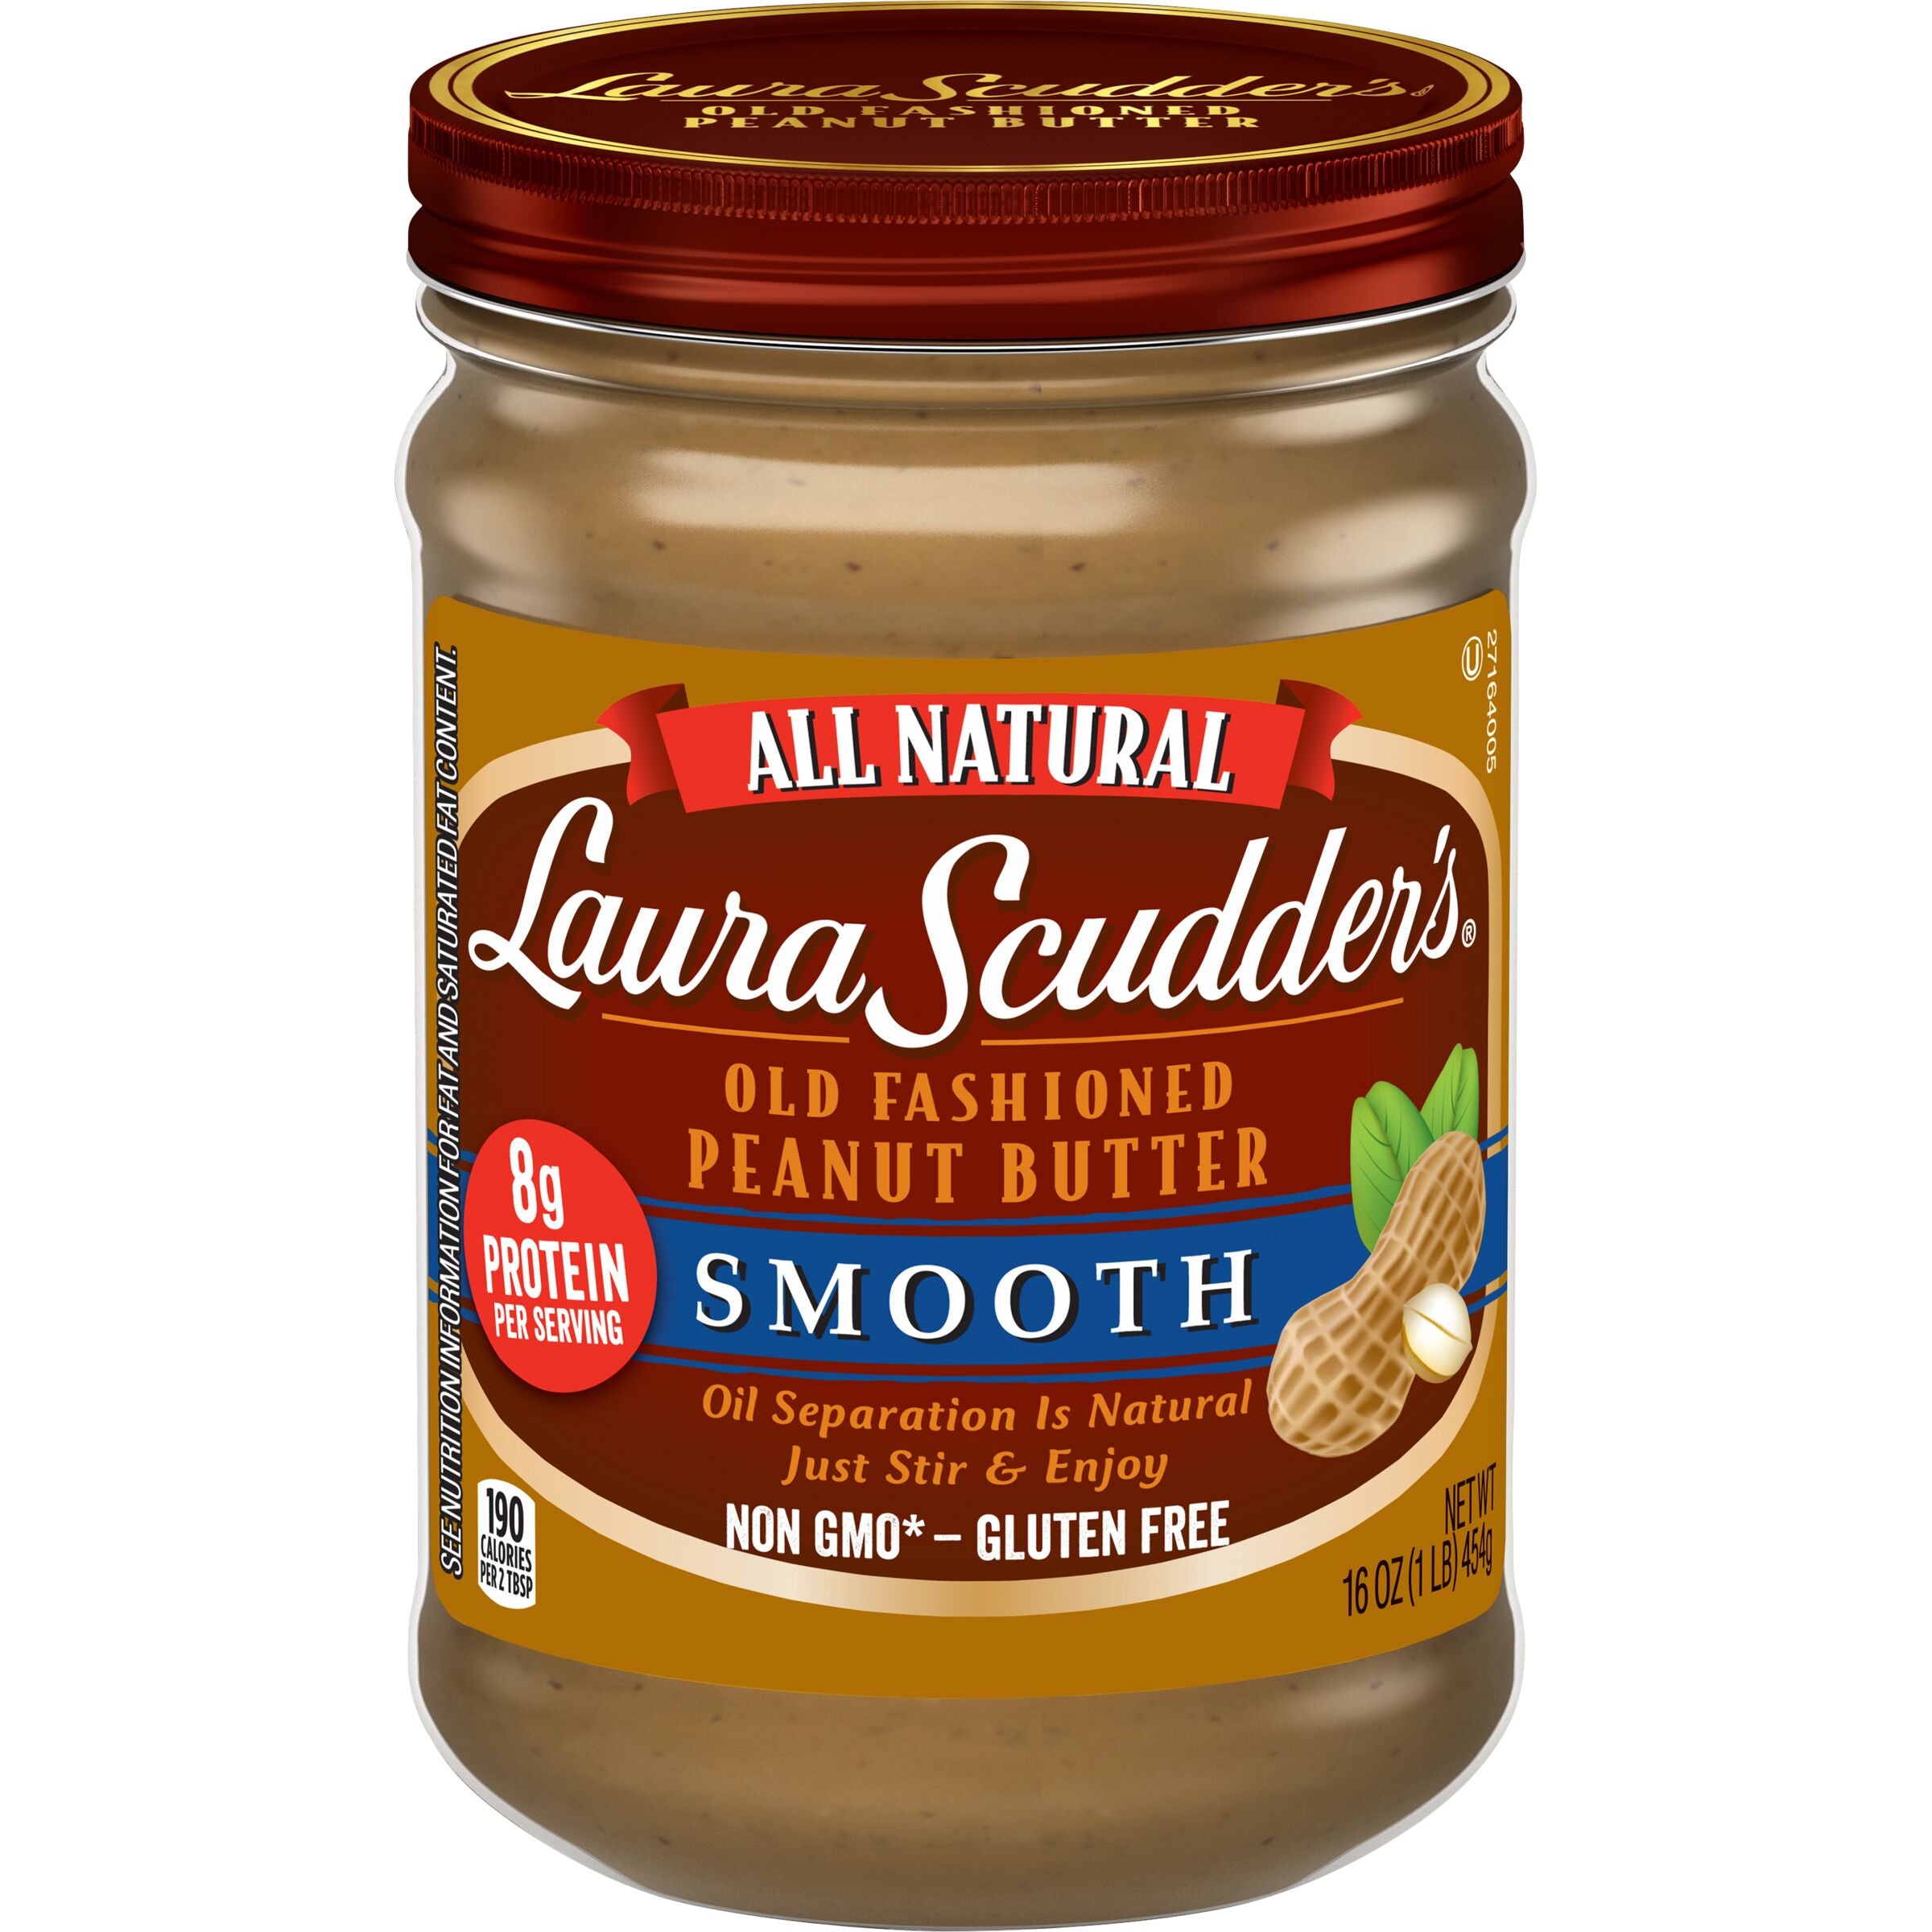 Laura Scudder's Natural Smooth Peanut Butter